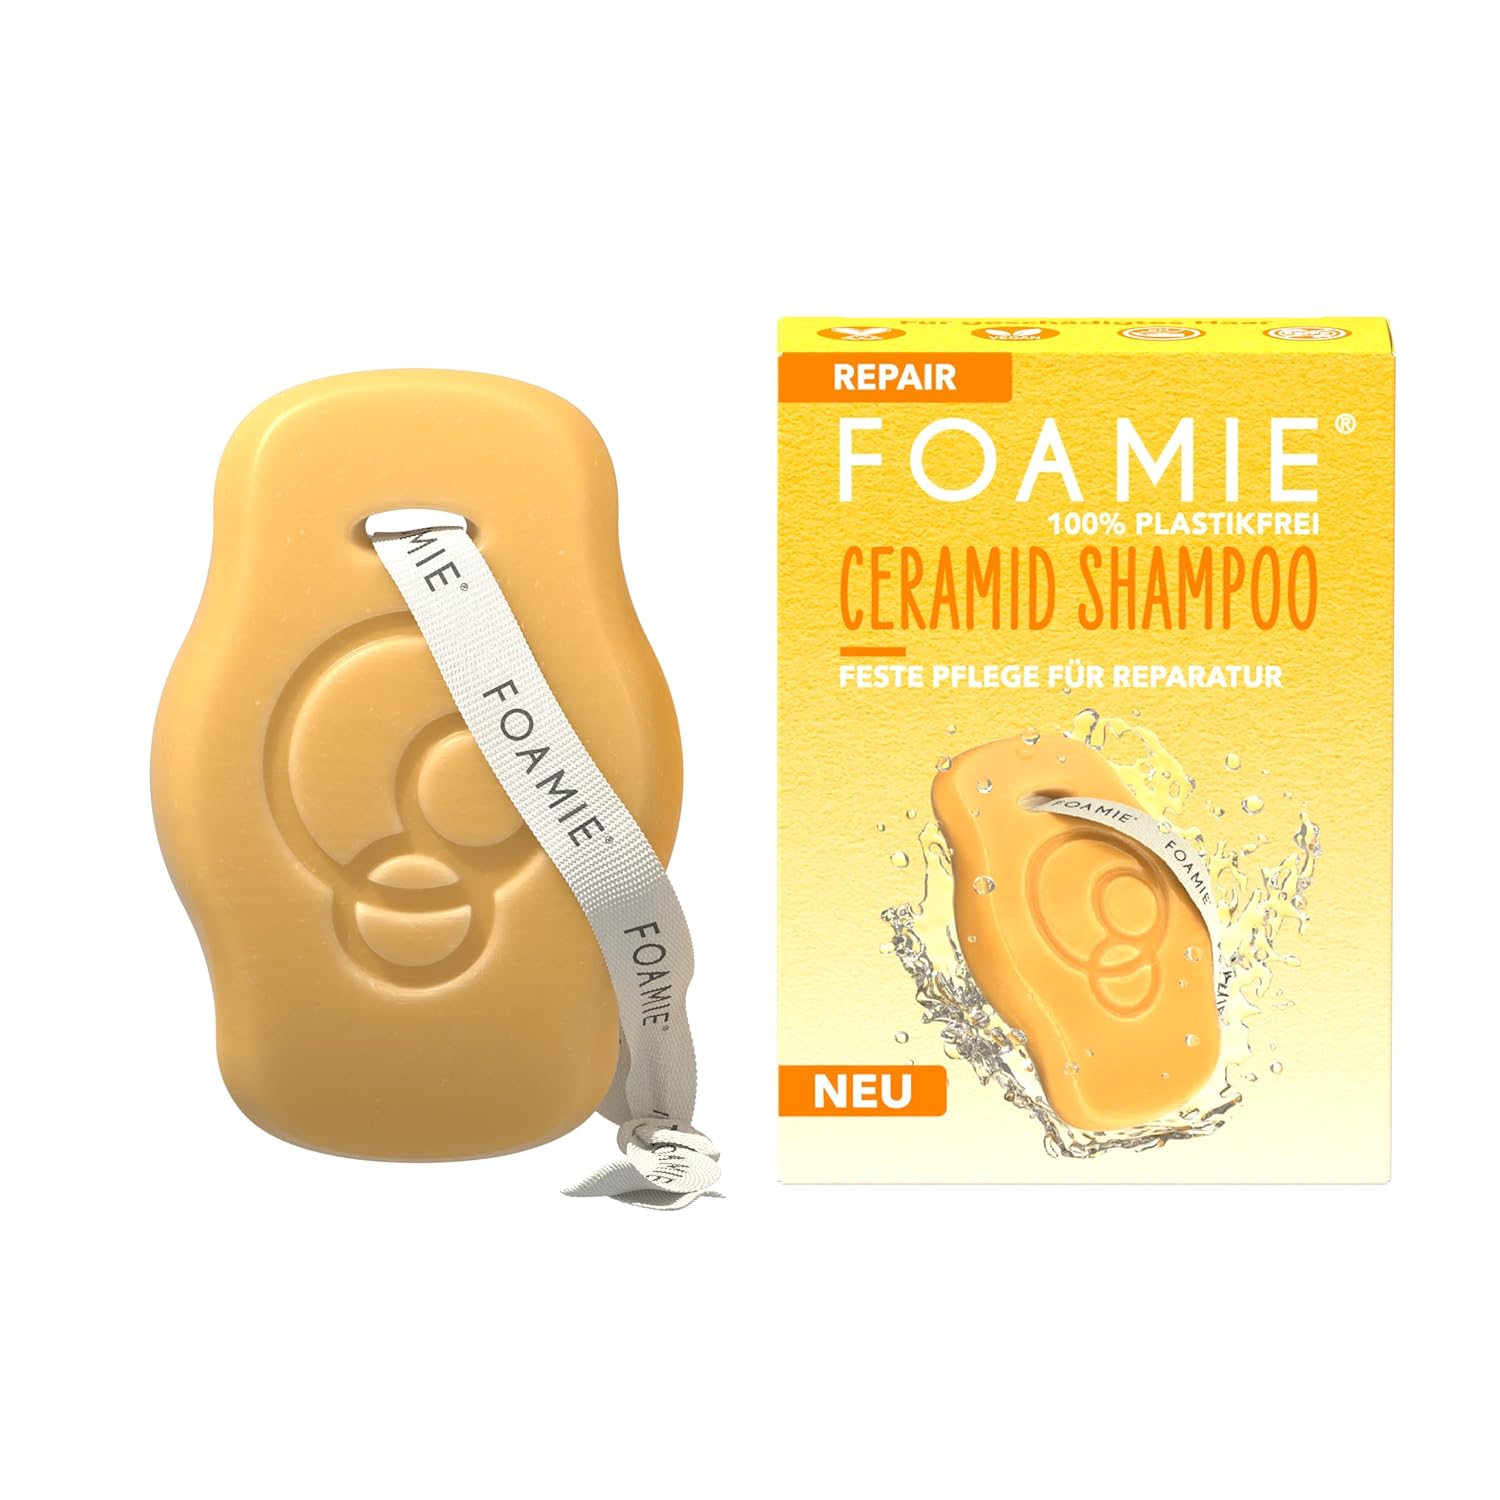 Foamie Solid Shampoo Repair, for Damaged Hair With Ceramide & Marula Oil - Anti -Frizz, Repairs & Protects, Combines Science & Nature for Healthy Softness, 80 G